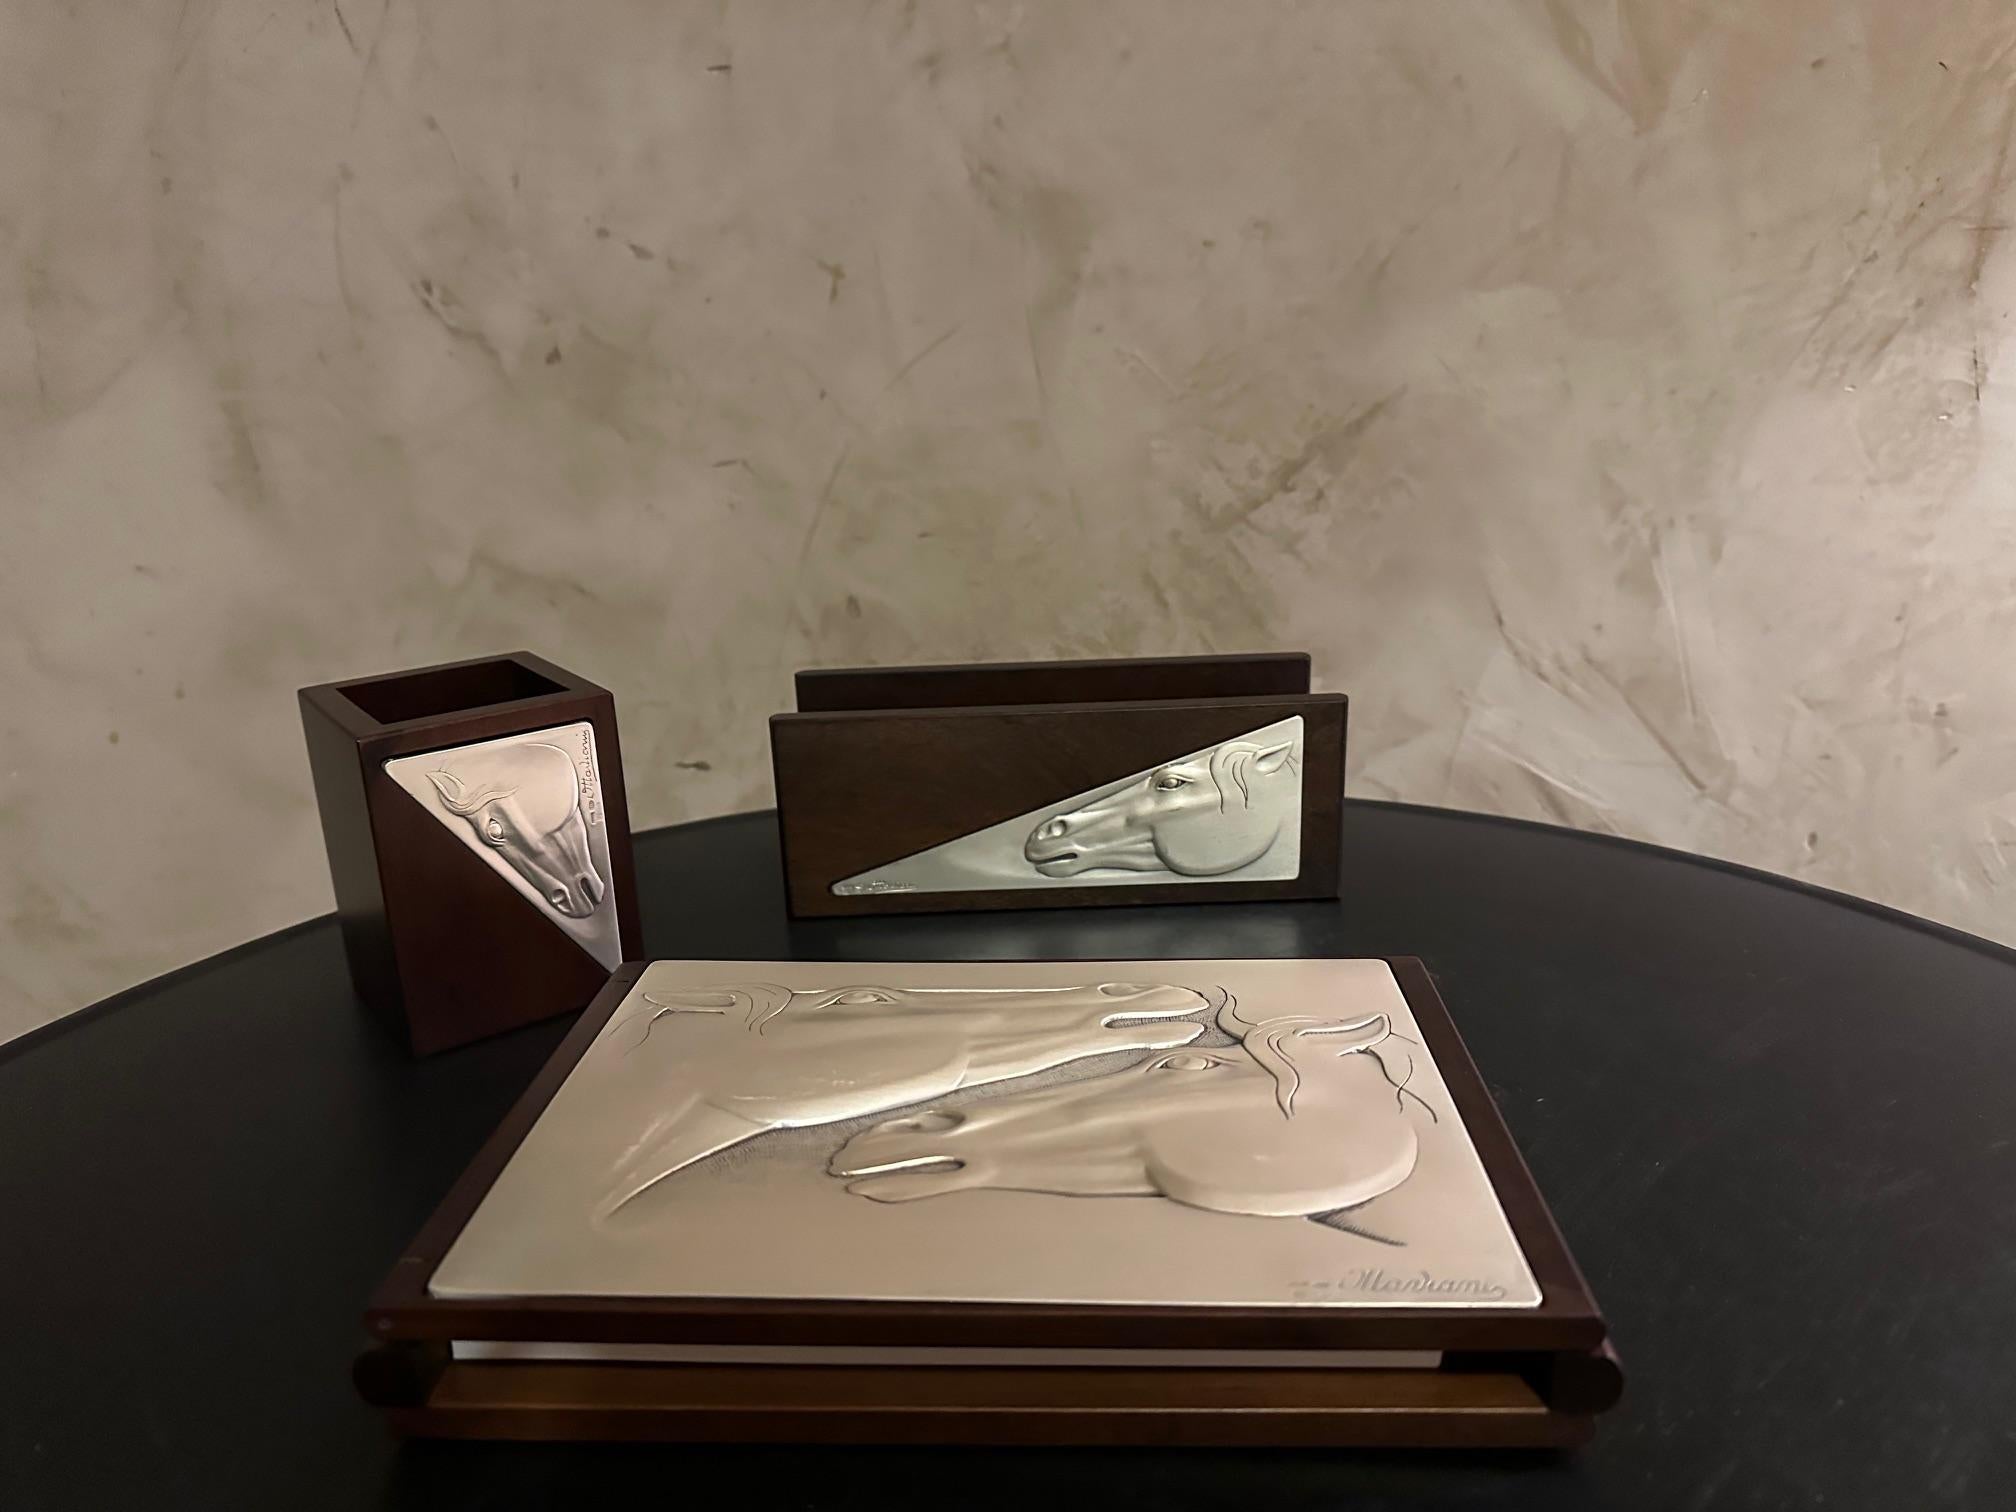 Very beautiful Italian desk set from the 70s consisting of a mail holder, a notepad and a pen holder.
Made of teak and a silver face decorated with horse heads.
Signed Ottaviani and silver and goldsmith's mark visible next to the signature.
Very